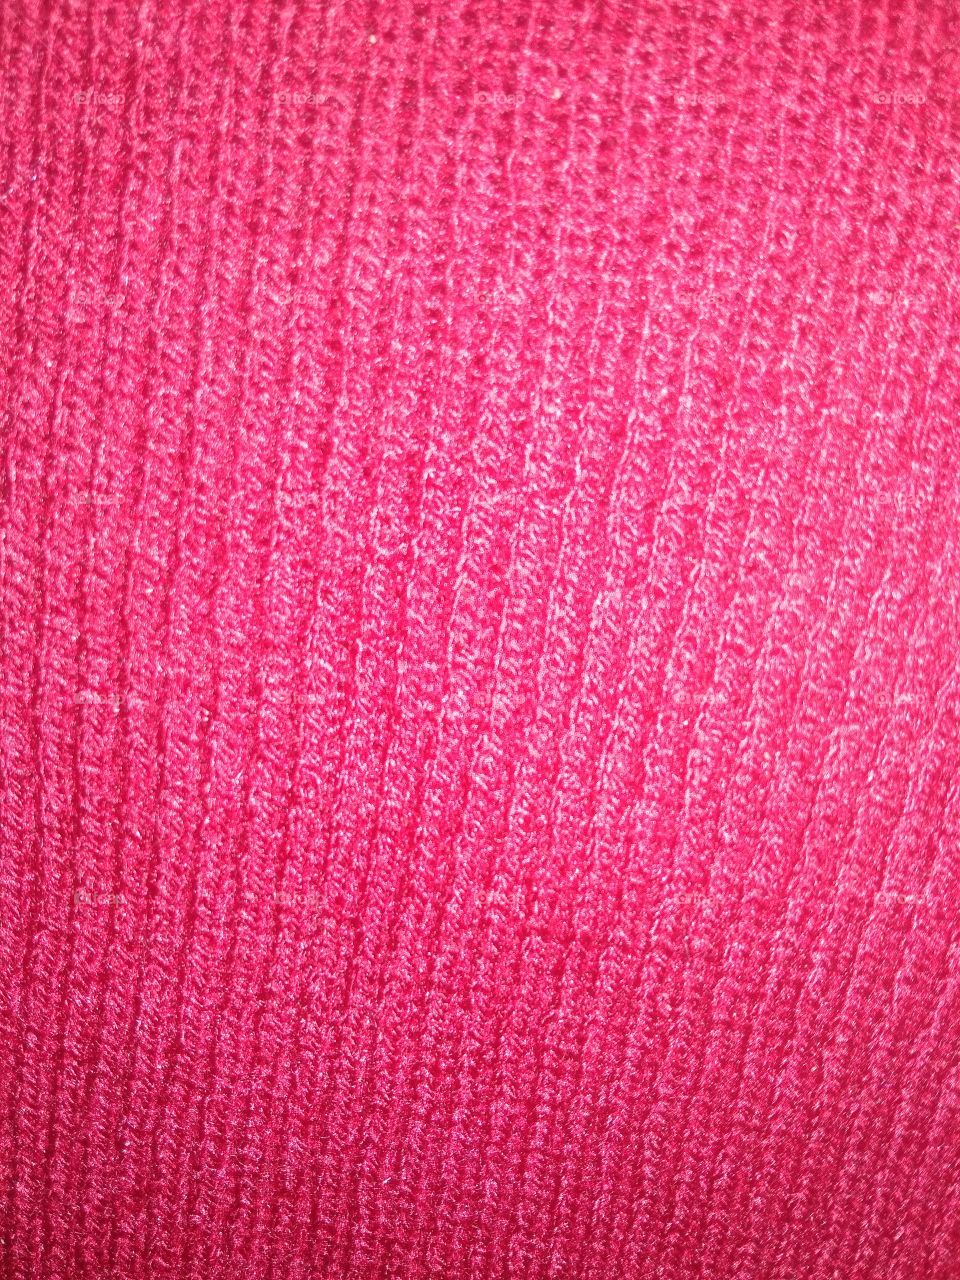 Backgrounds Red full frame Textured pink colour textile pattern Fashion close up in Patna India